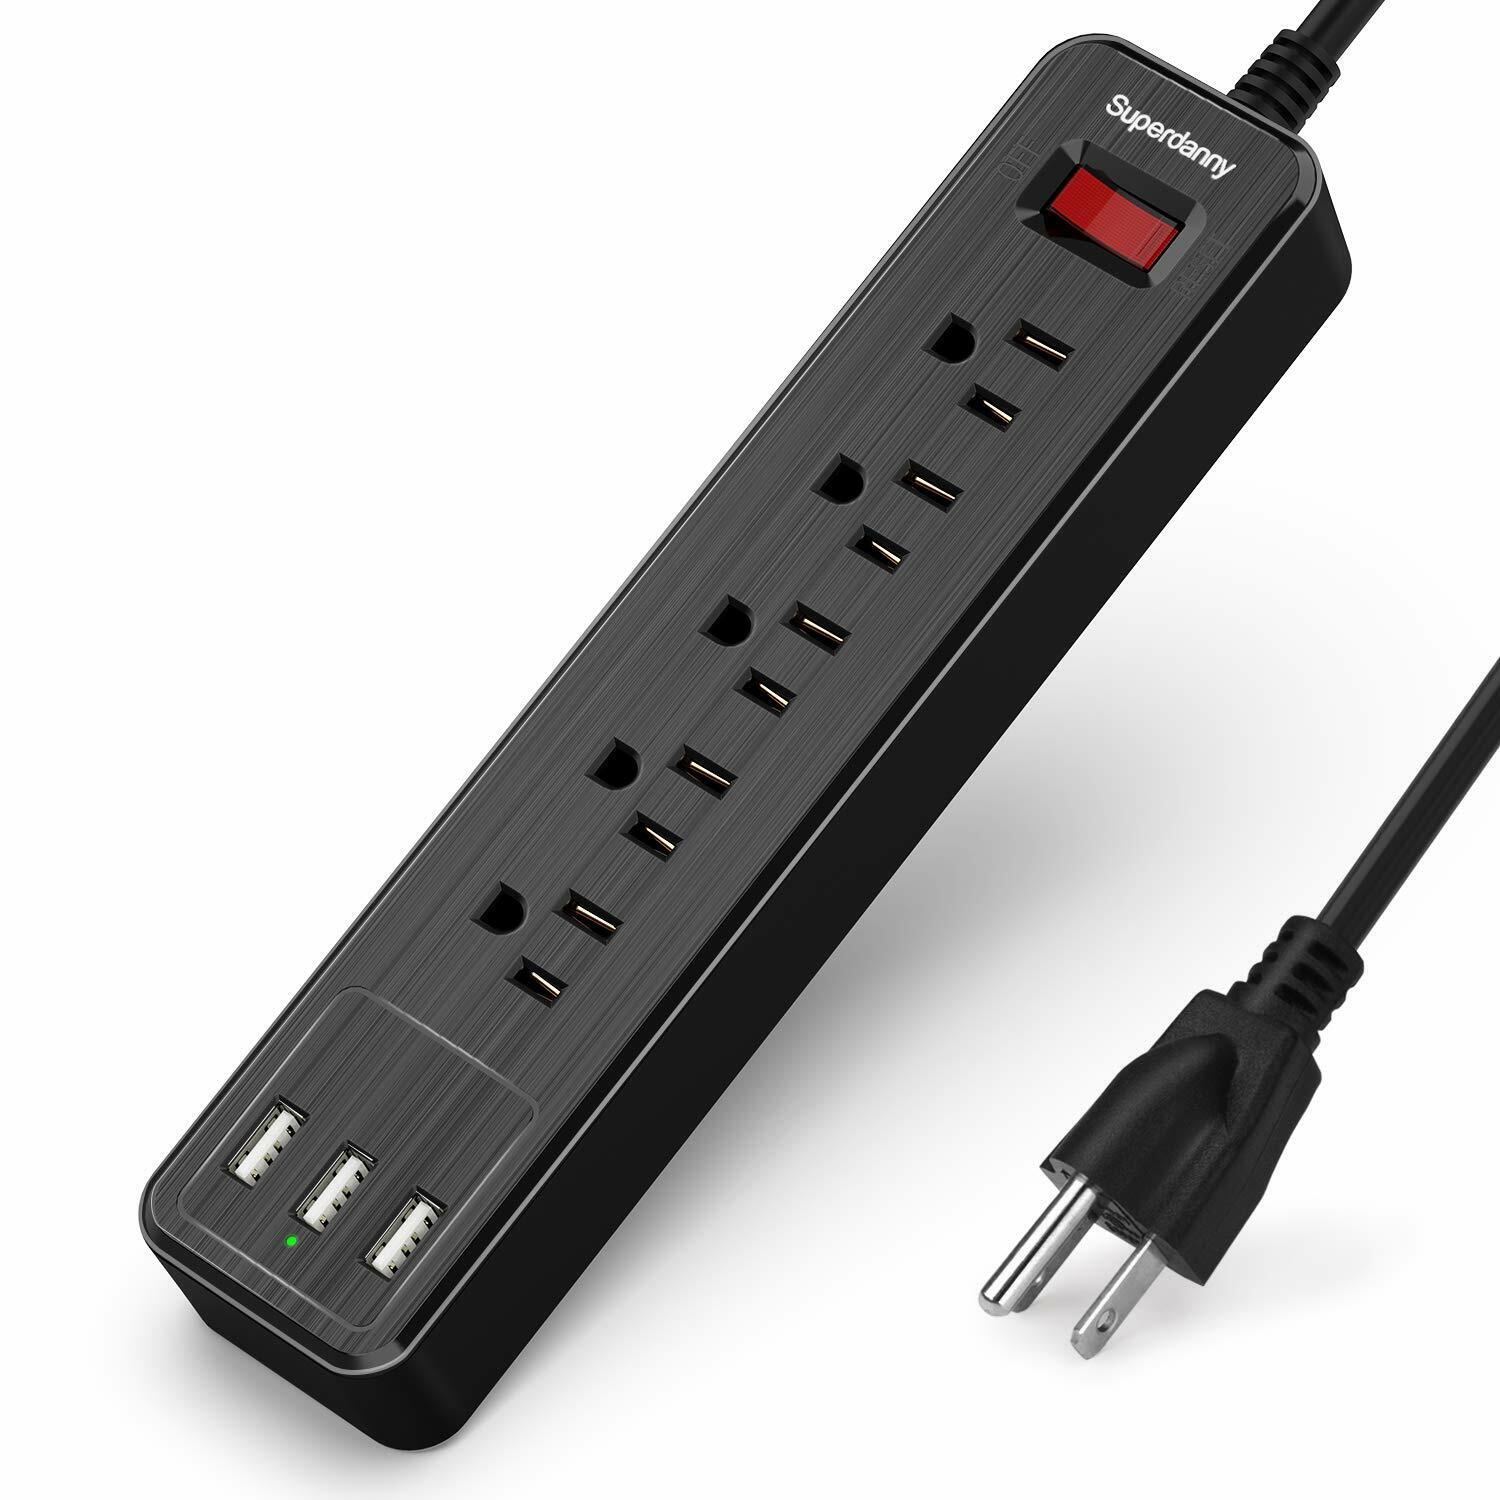 Wall Mountable Power Strip Tower Surge Protector with USB Ports 5 Outlet Plugs